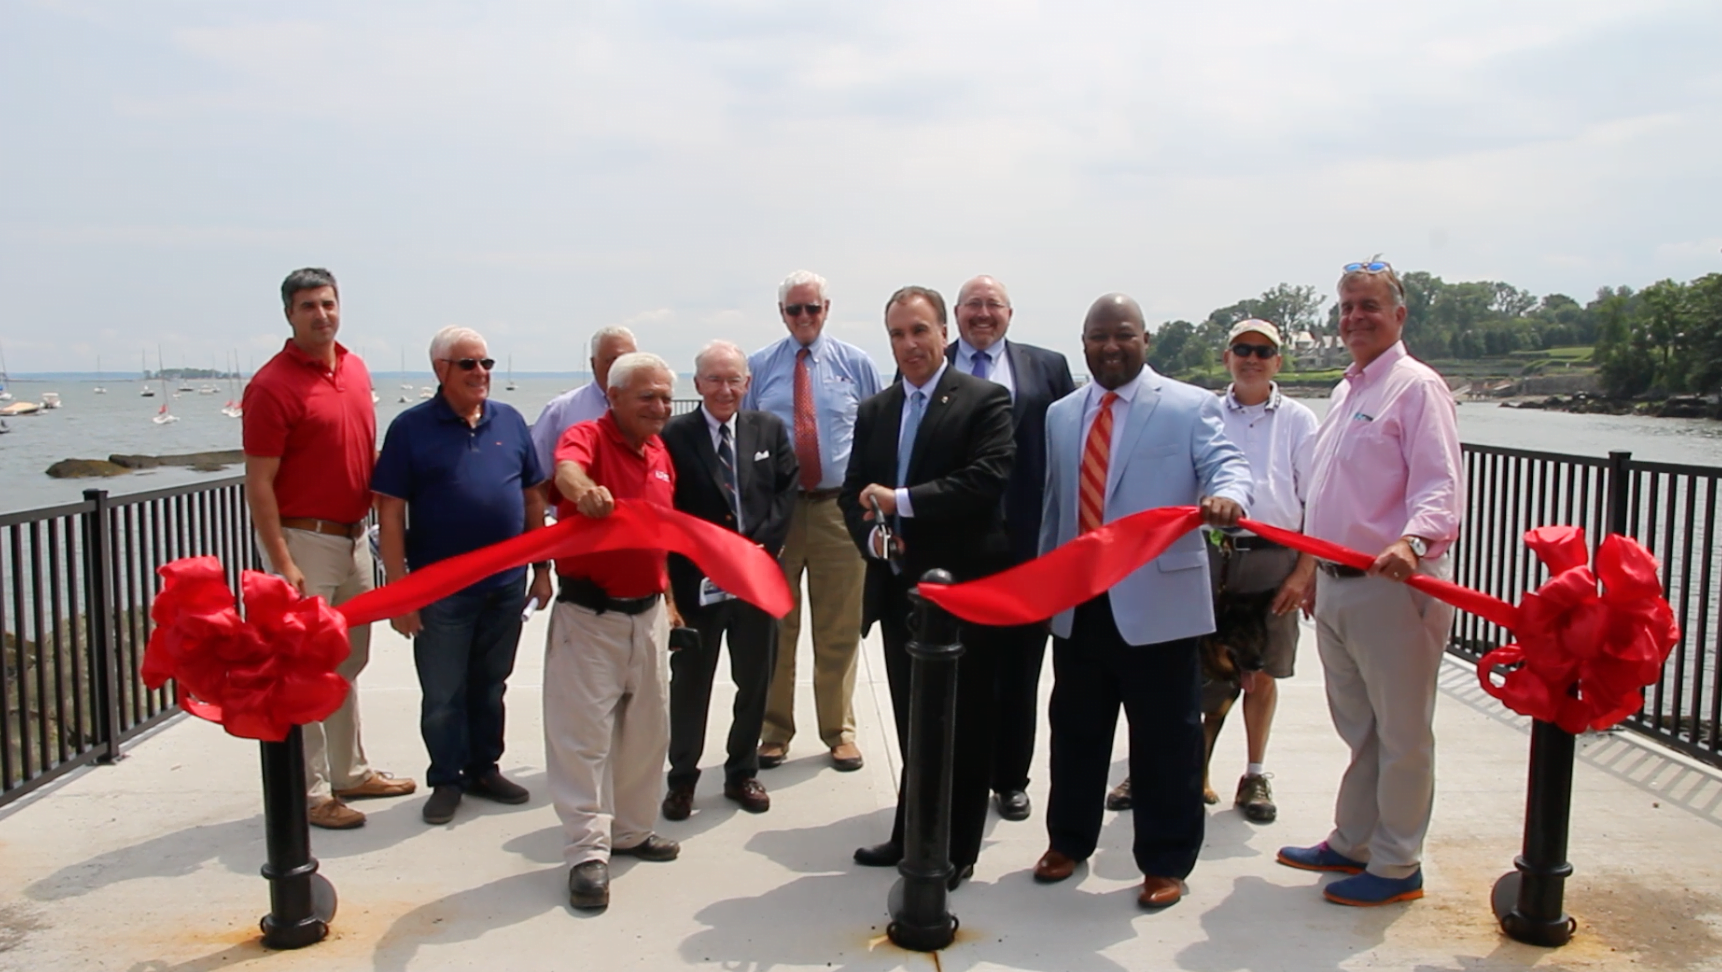 Newly reopened Steamboat Road Pier. July 8, 2019 Photo: Leslie Yager